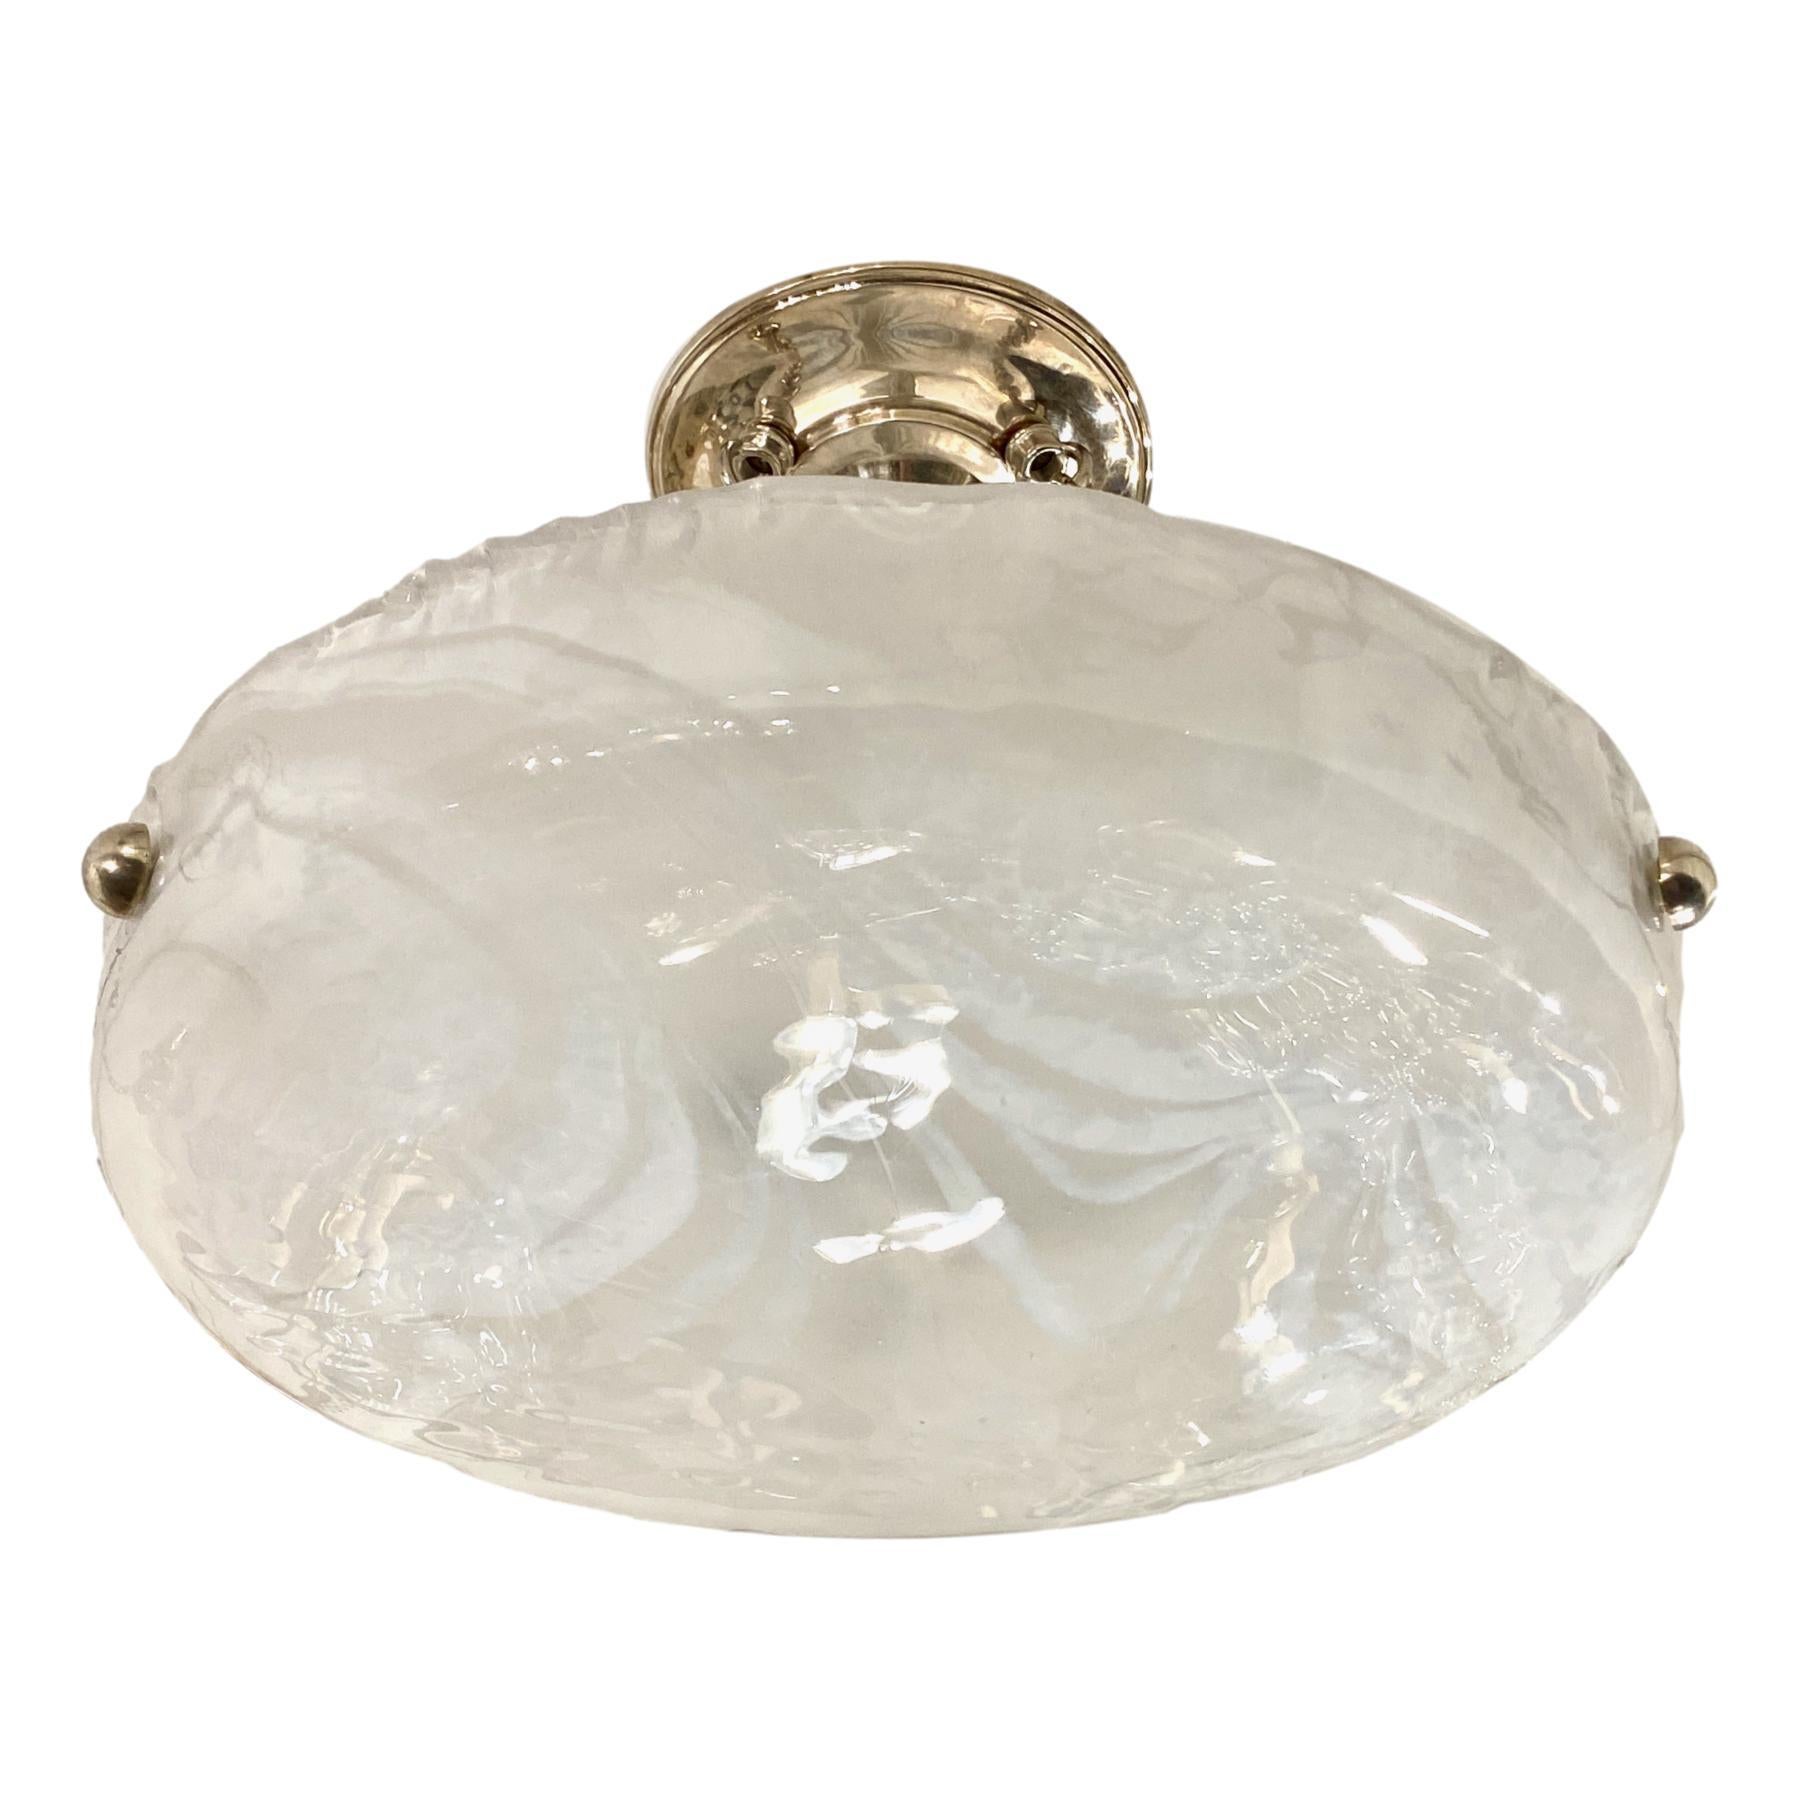 A circa 1960's blown white and clear art glass pendant light fixture with nickel-plated hardware and three interior lights.

Measurements:
Drop: 10